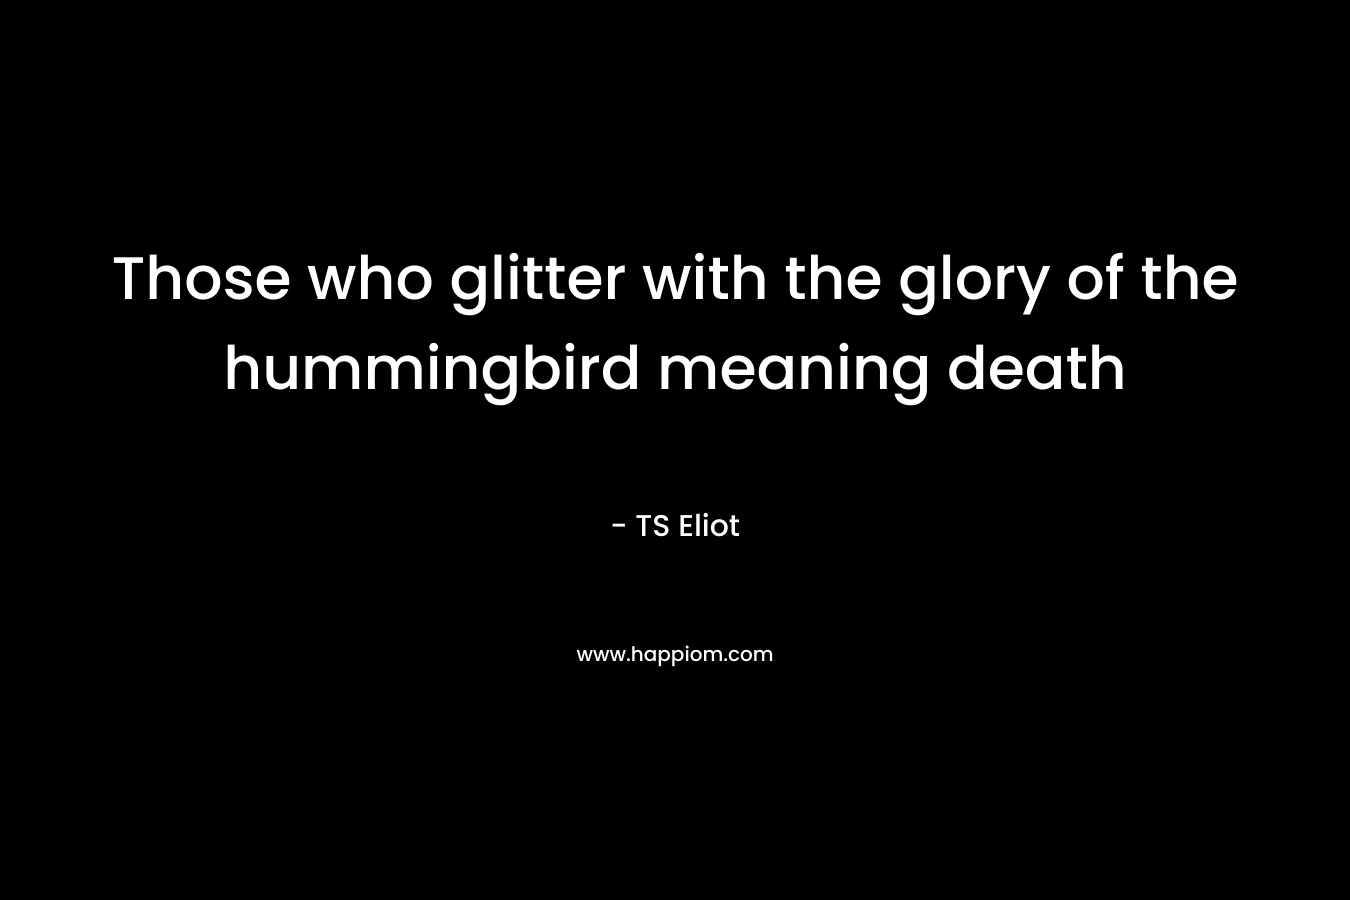 Those who glitter with the glory of the hummingbird meaning death